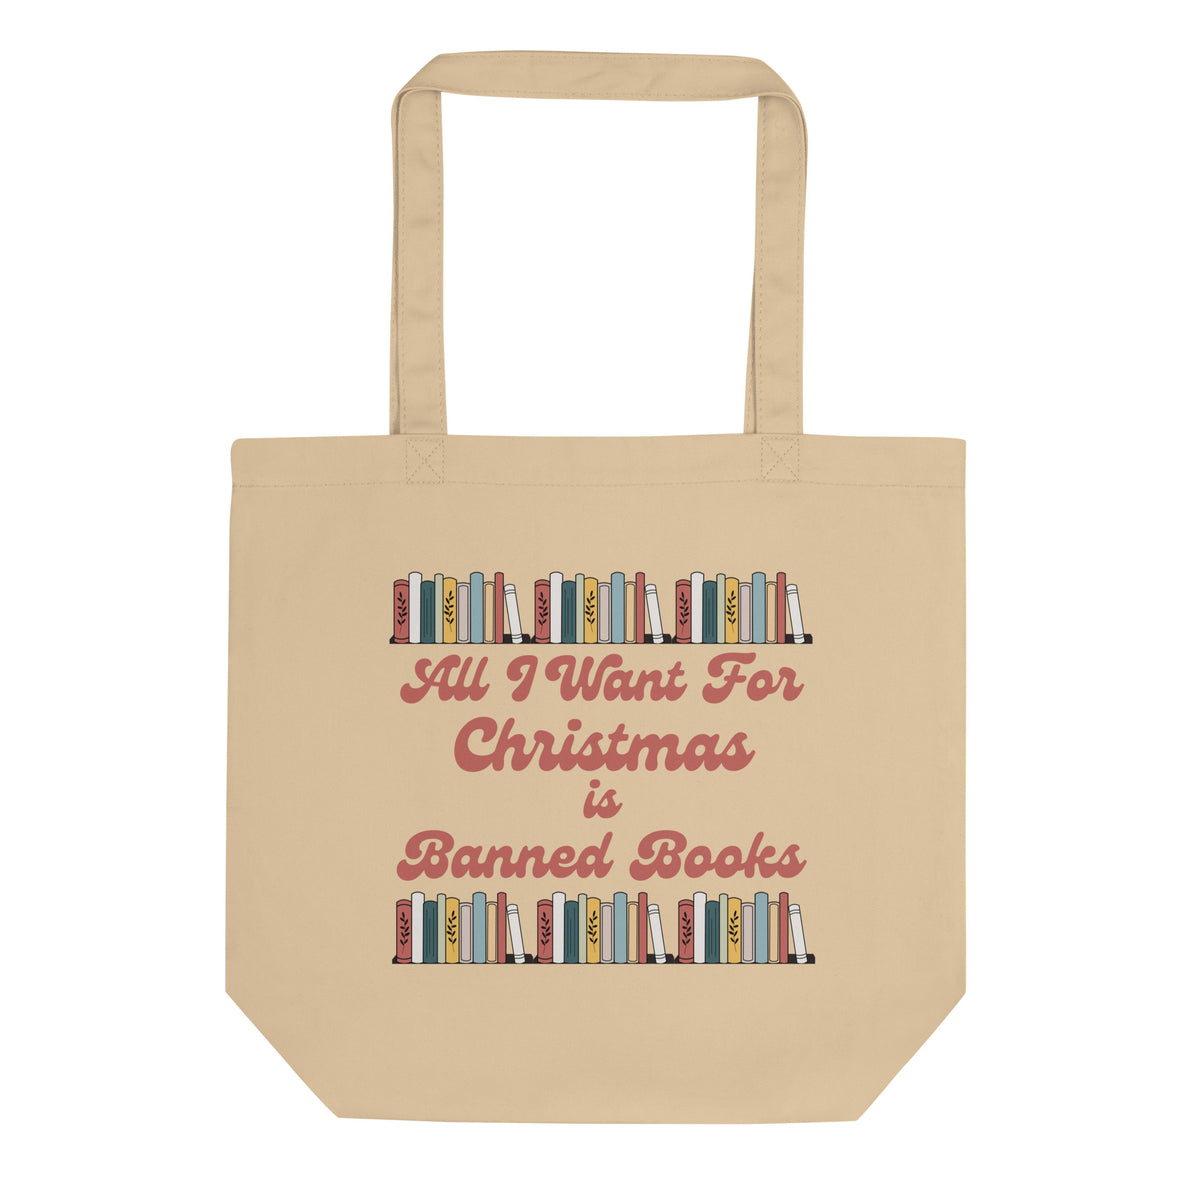 All I Want For Christmas is Banned Books Eco Tote Bag